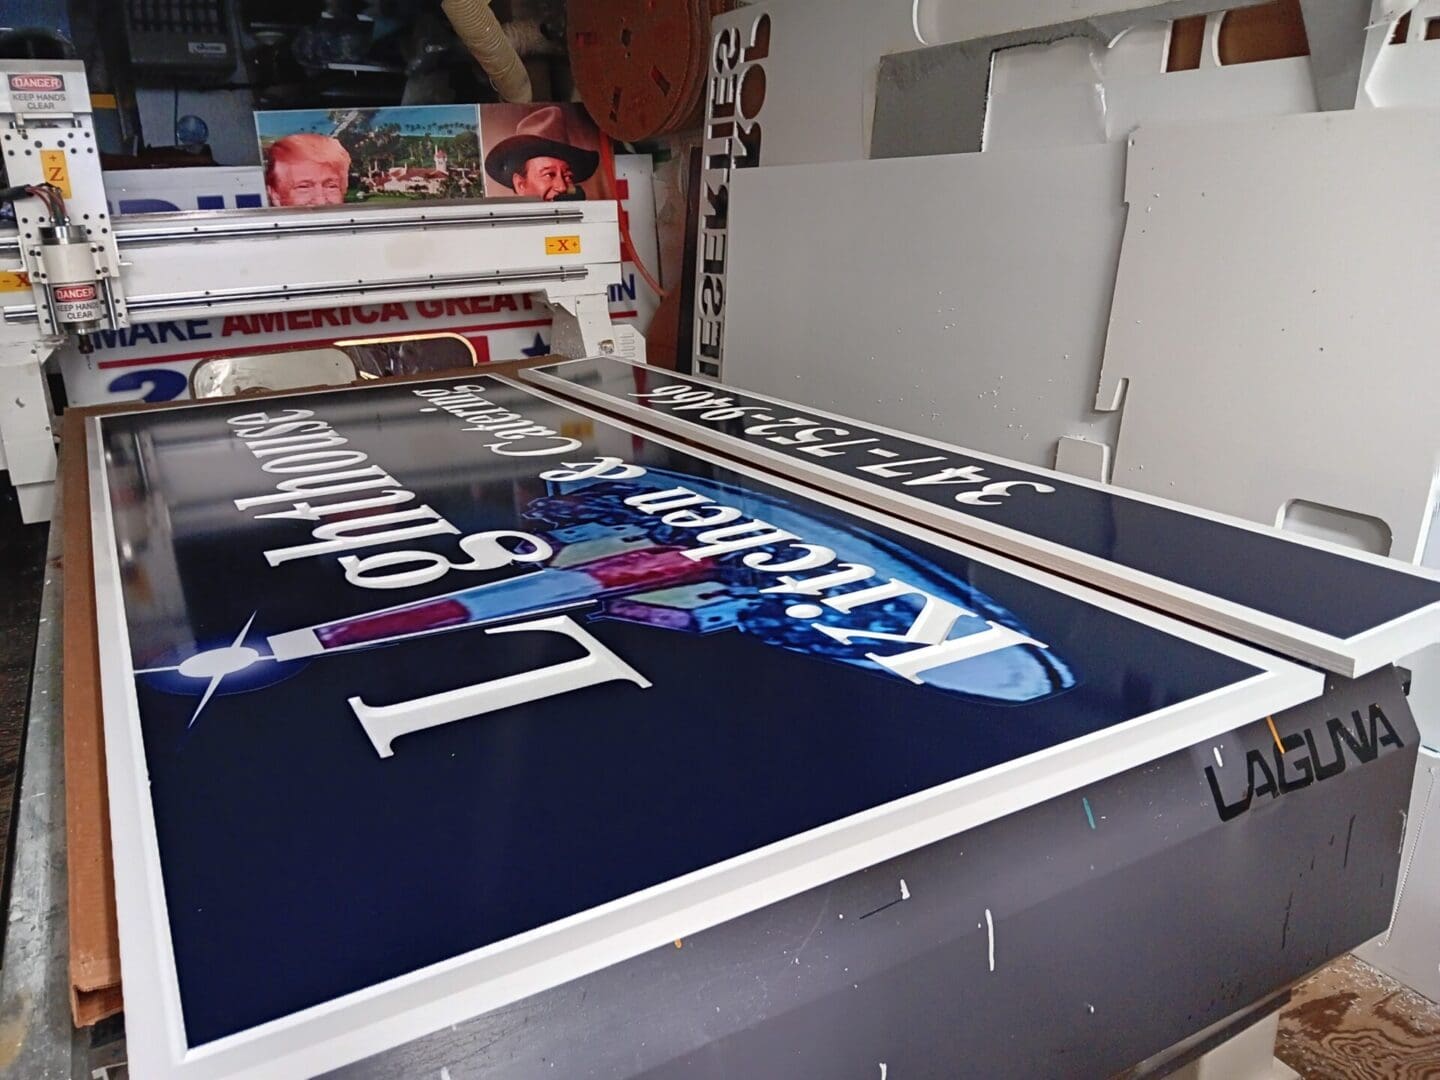 Large format printer producing a blue and white advertising banner for ADP USA Solutions Gallery with inverted text, inside a cluttered workshop with various tools and materials visible.